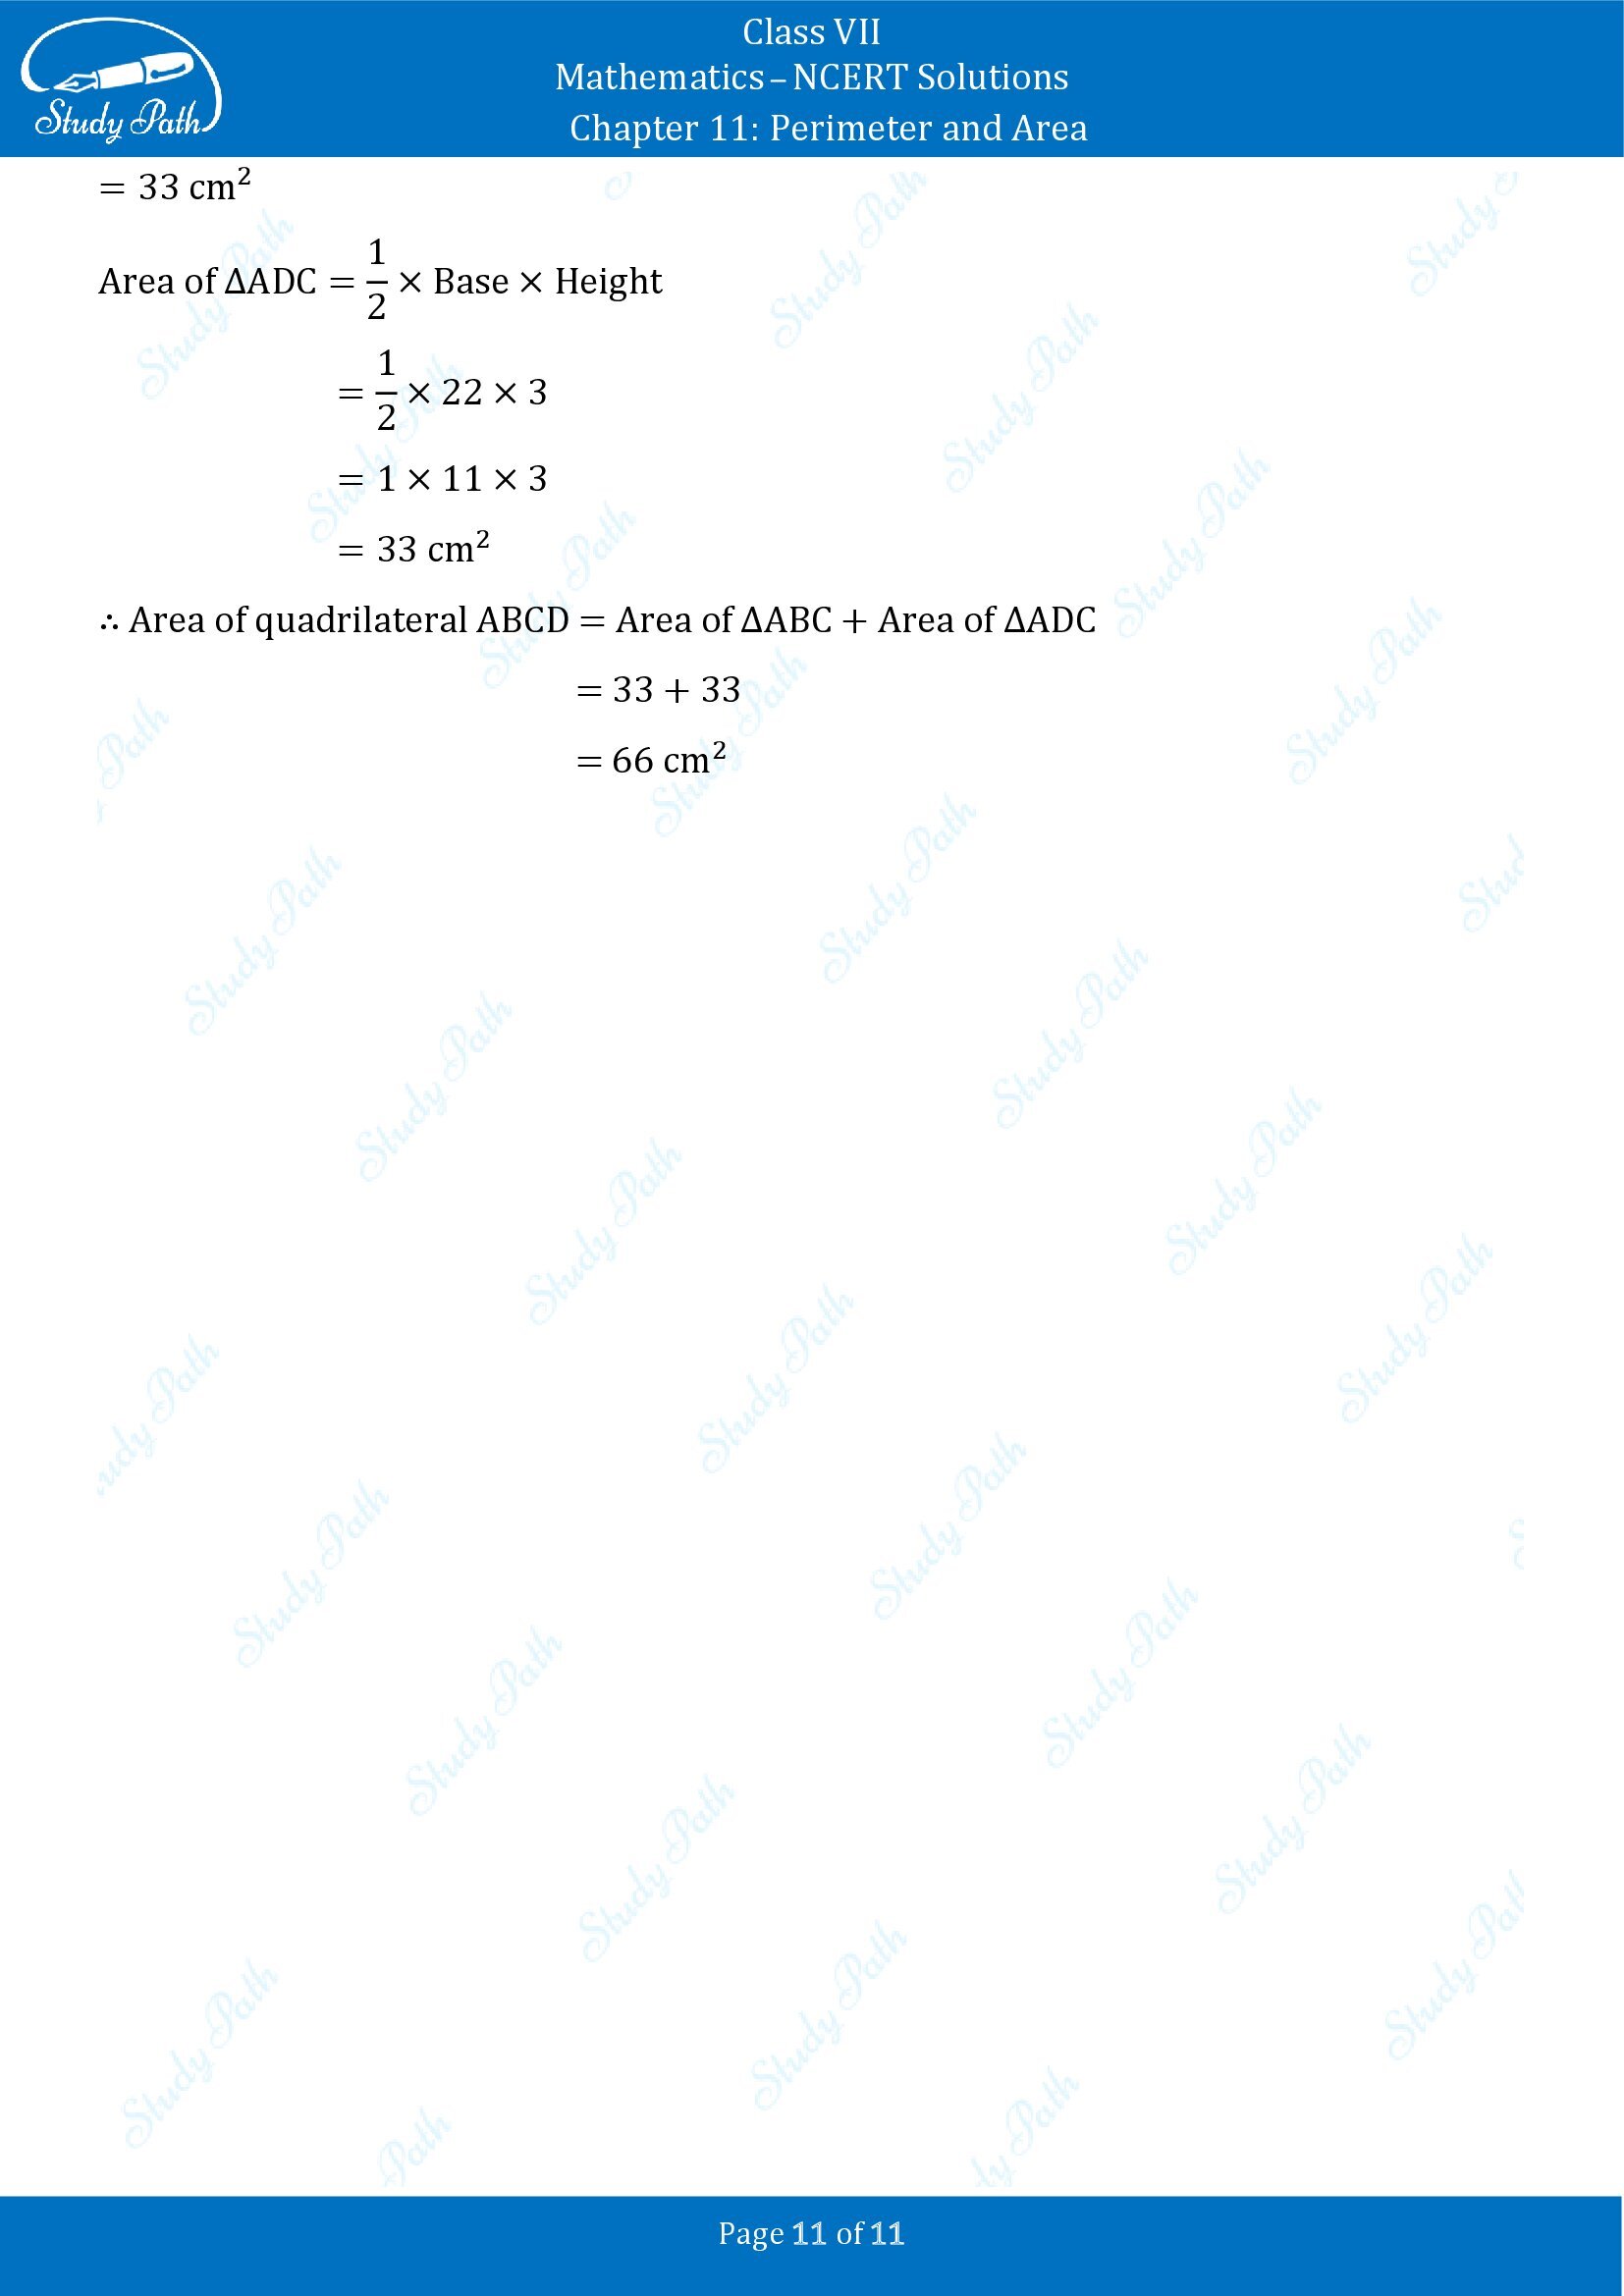 NCERT Solutions for Class 7 Maths Chapter 11 Perimeter and Area Exercise 11.4 00011